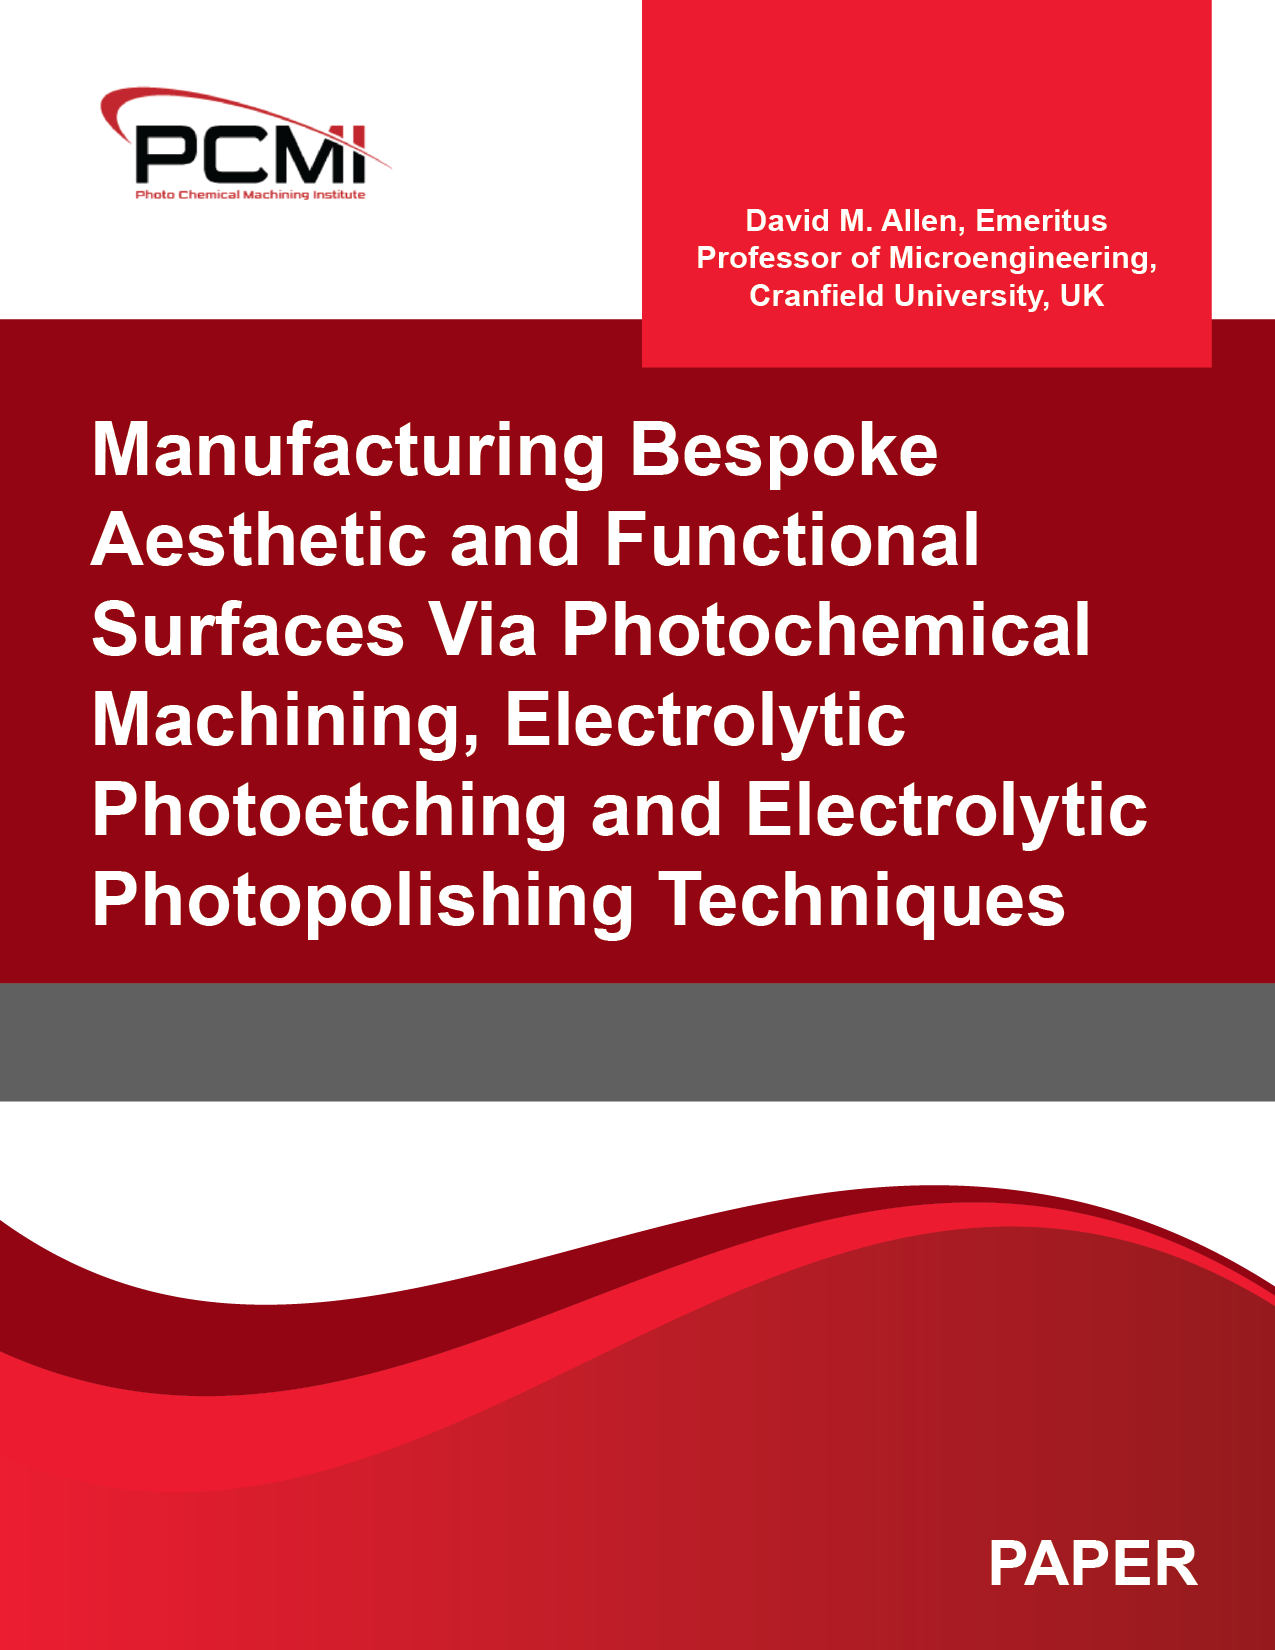 Manufacturing Bespoke Aesthetic and Functional Surfaces Via Photochemical Machining, Electrolytic Photoetching and Electrolytic Photopolishing Techniques